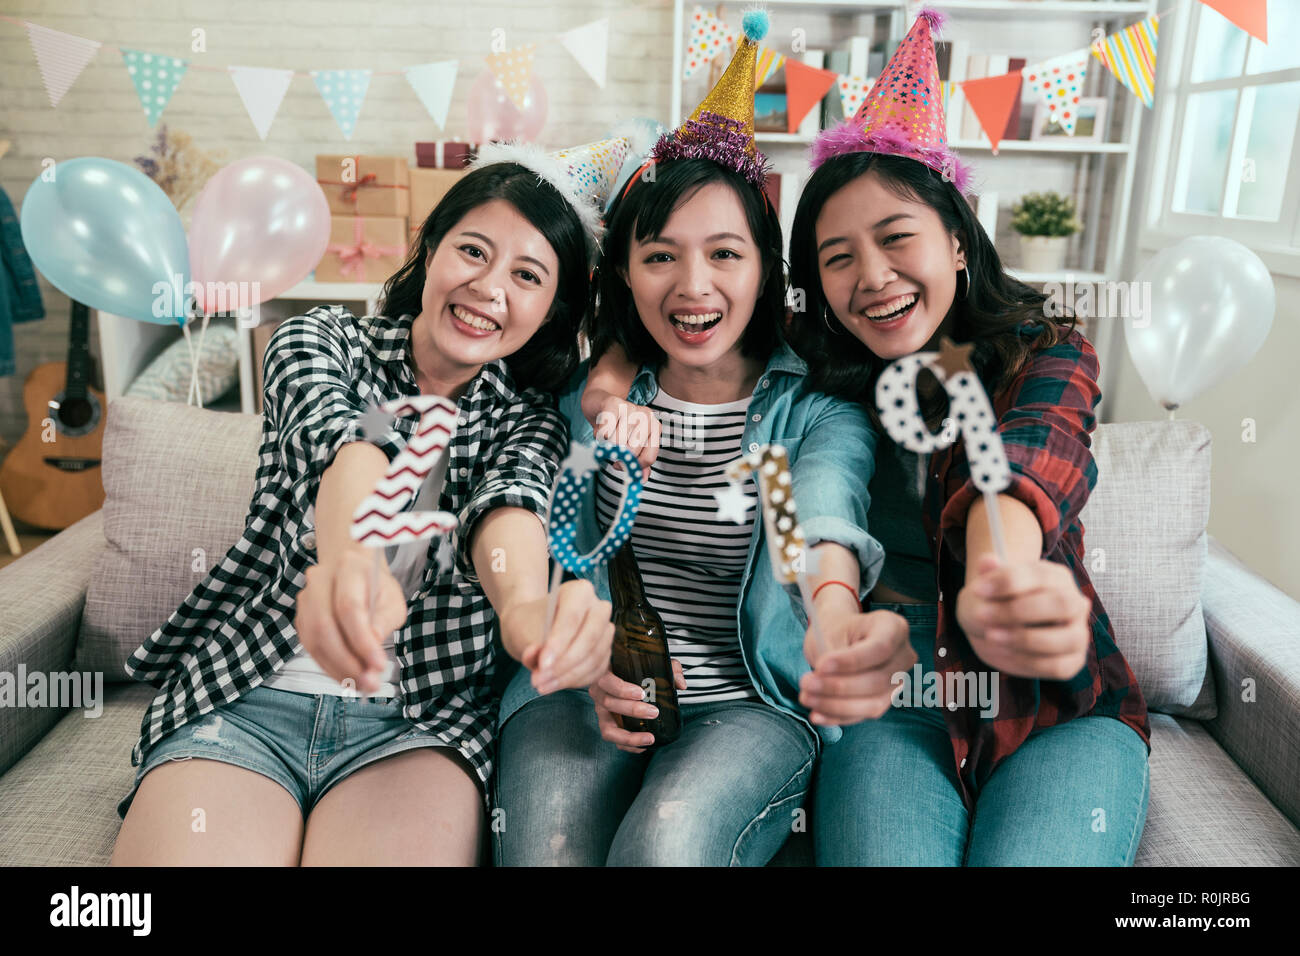 attractive girls celebrating new year eve house party. young friends showing 2019 number to the camera smiling cheerfully sitting on couch. beautiful  Stock Photo